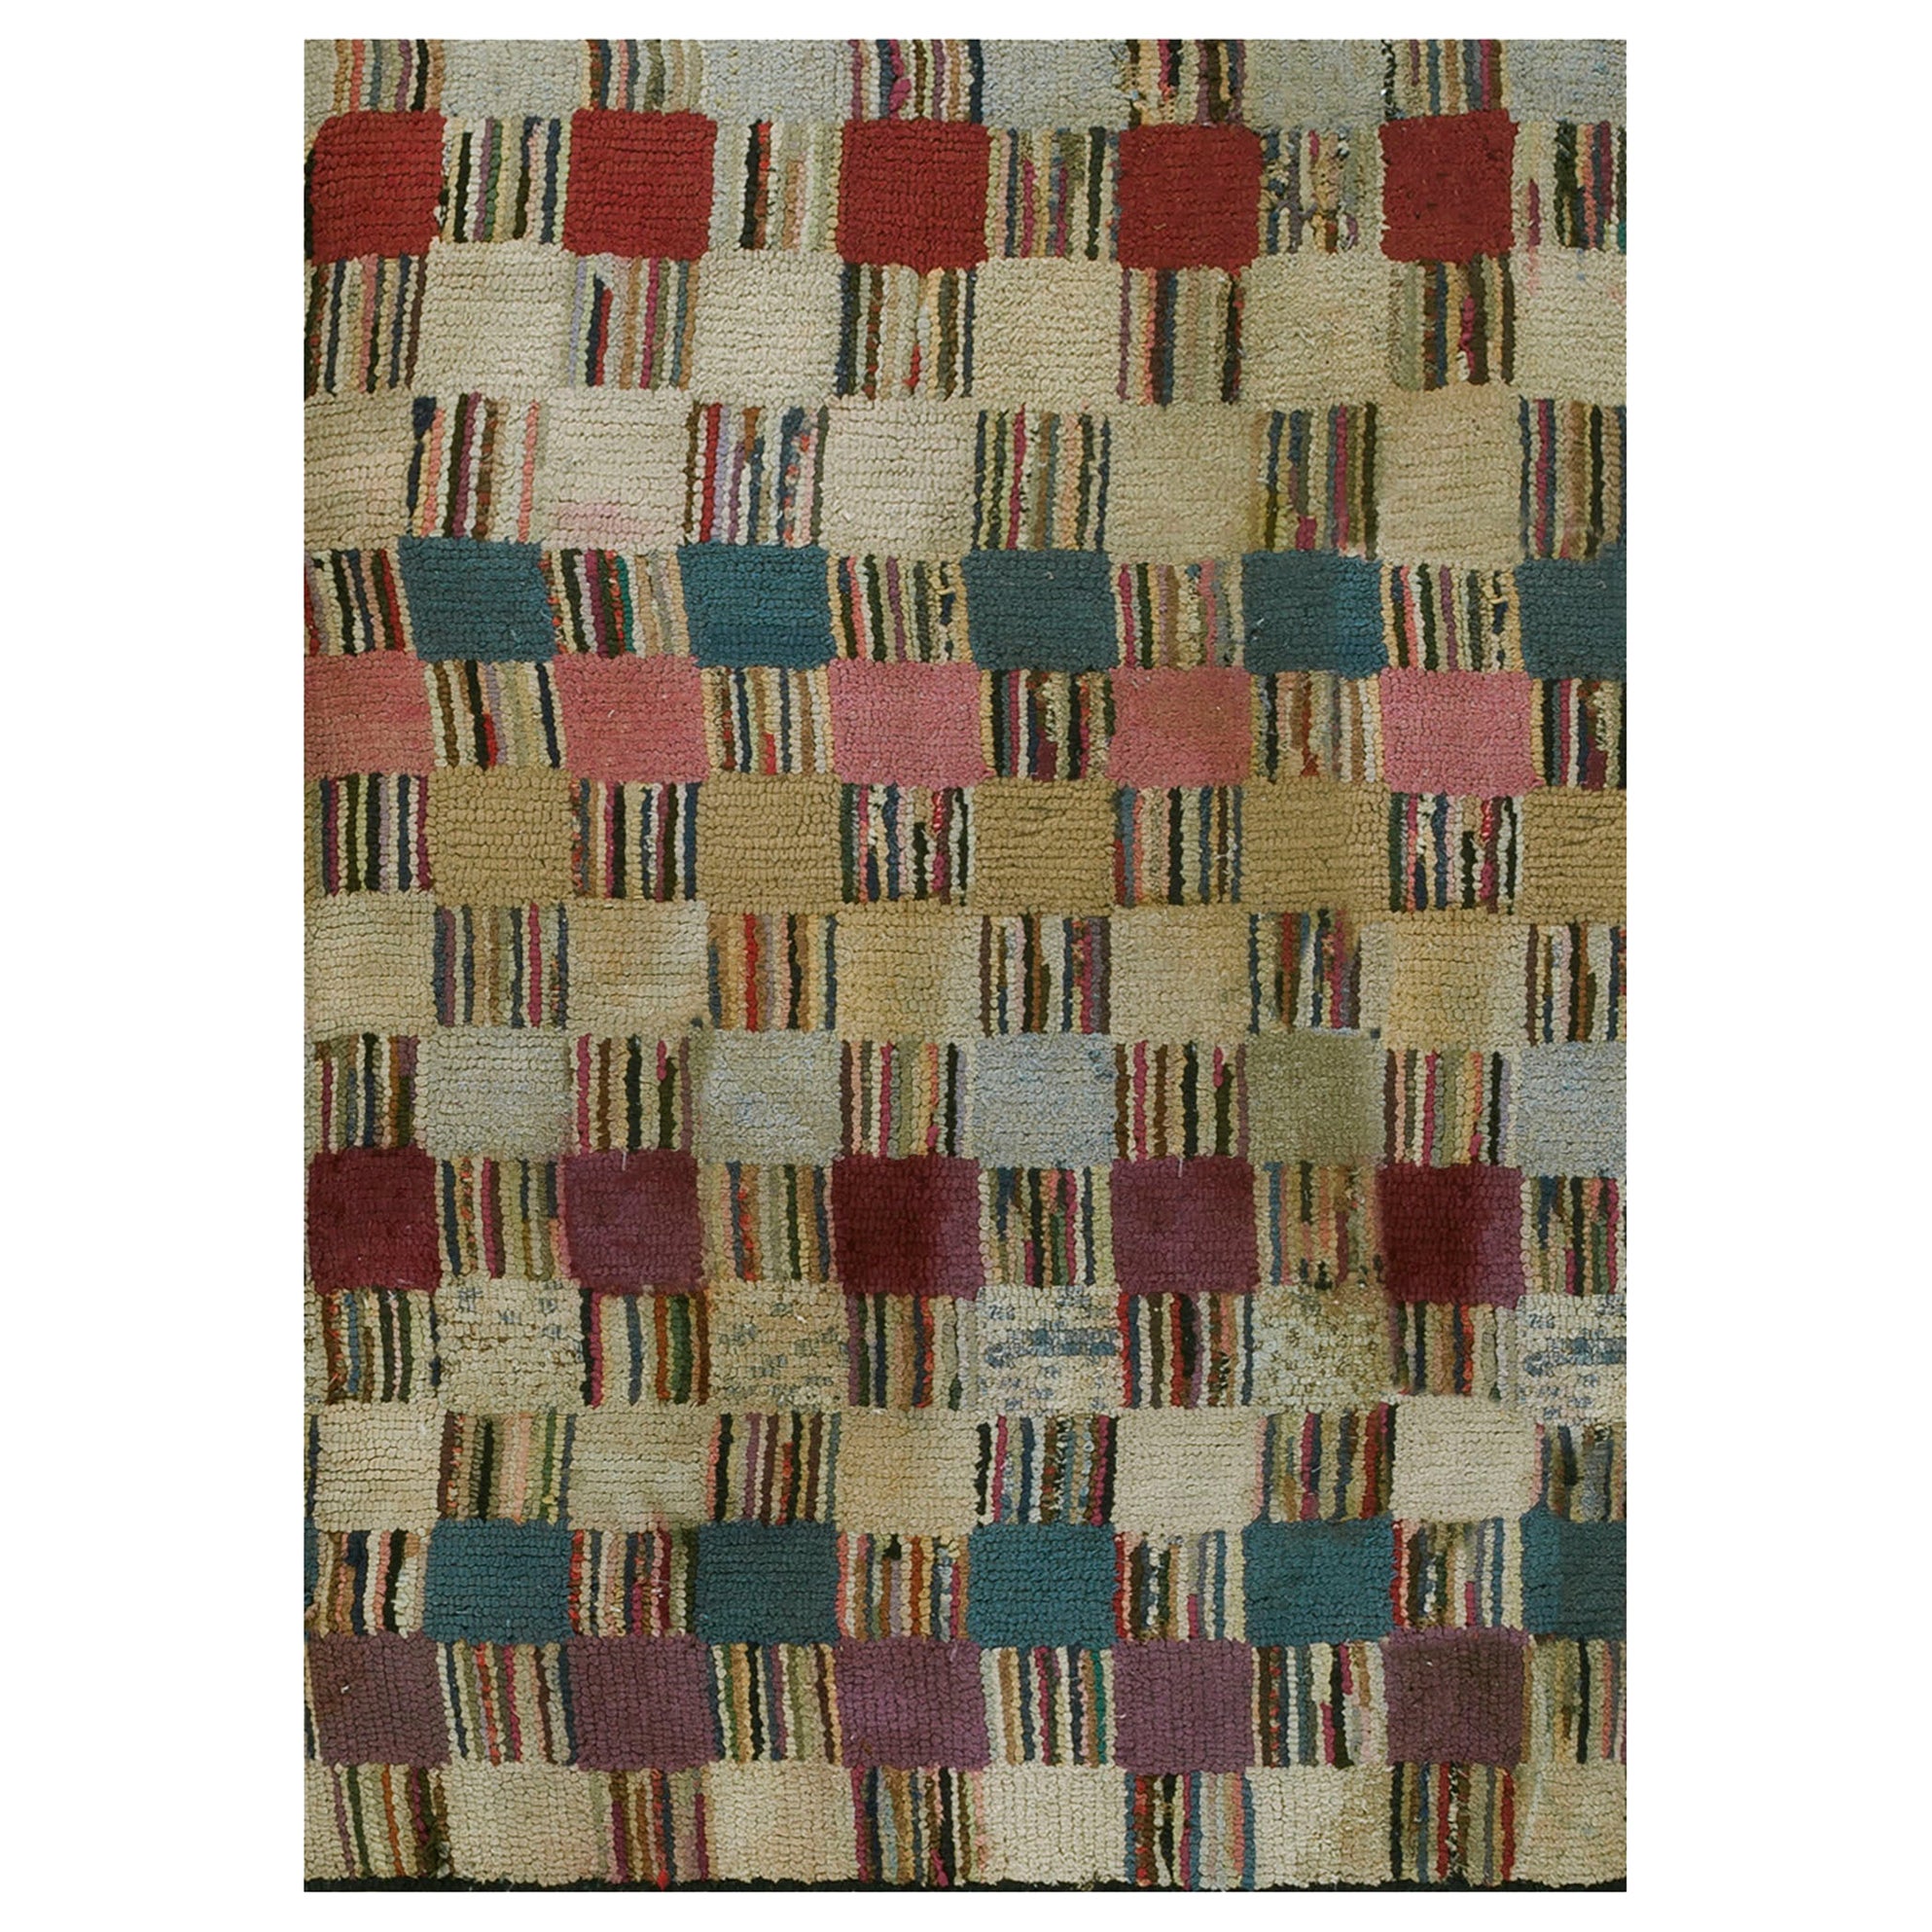 Antique American Hooked Rug 3'3" x 3'6"